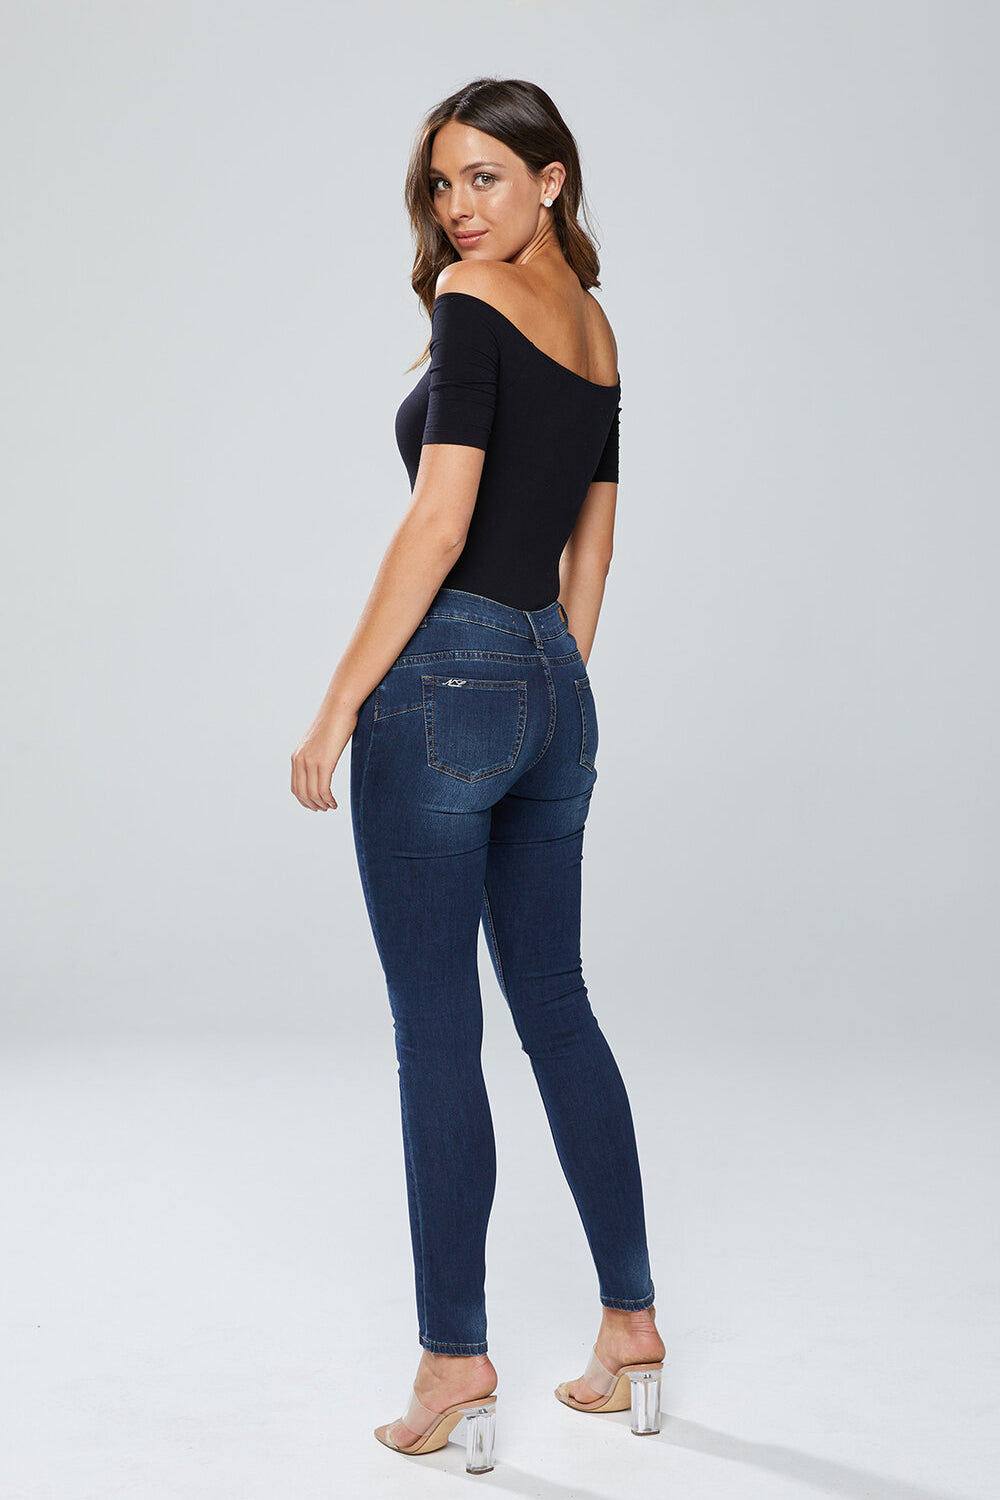 Raunds Denim Jeans by New London | Shop at Wallace and Gibbs NZ